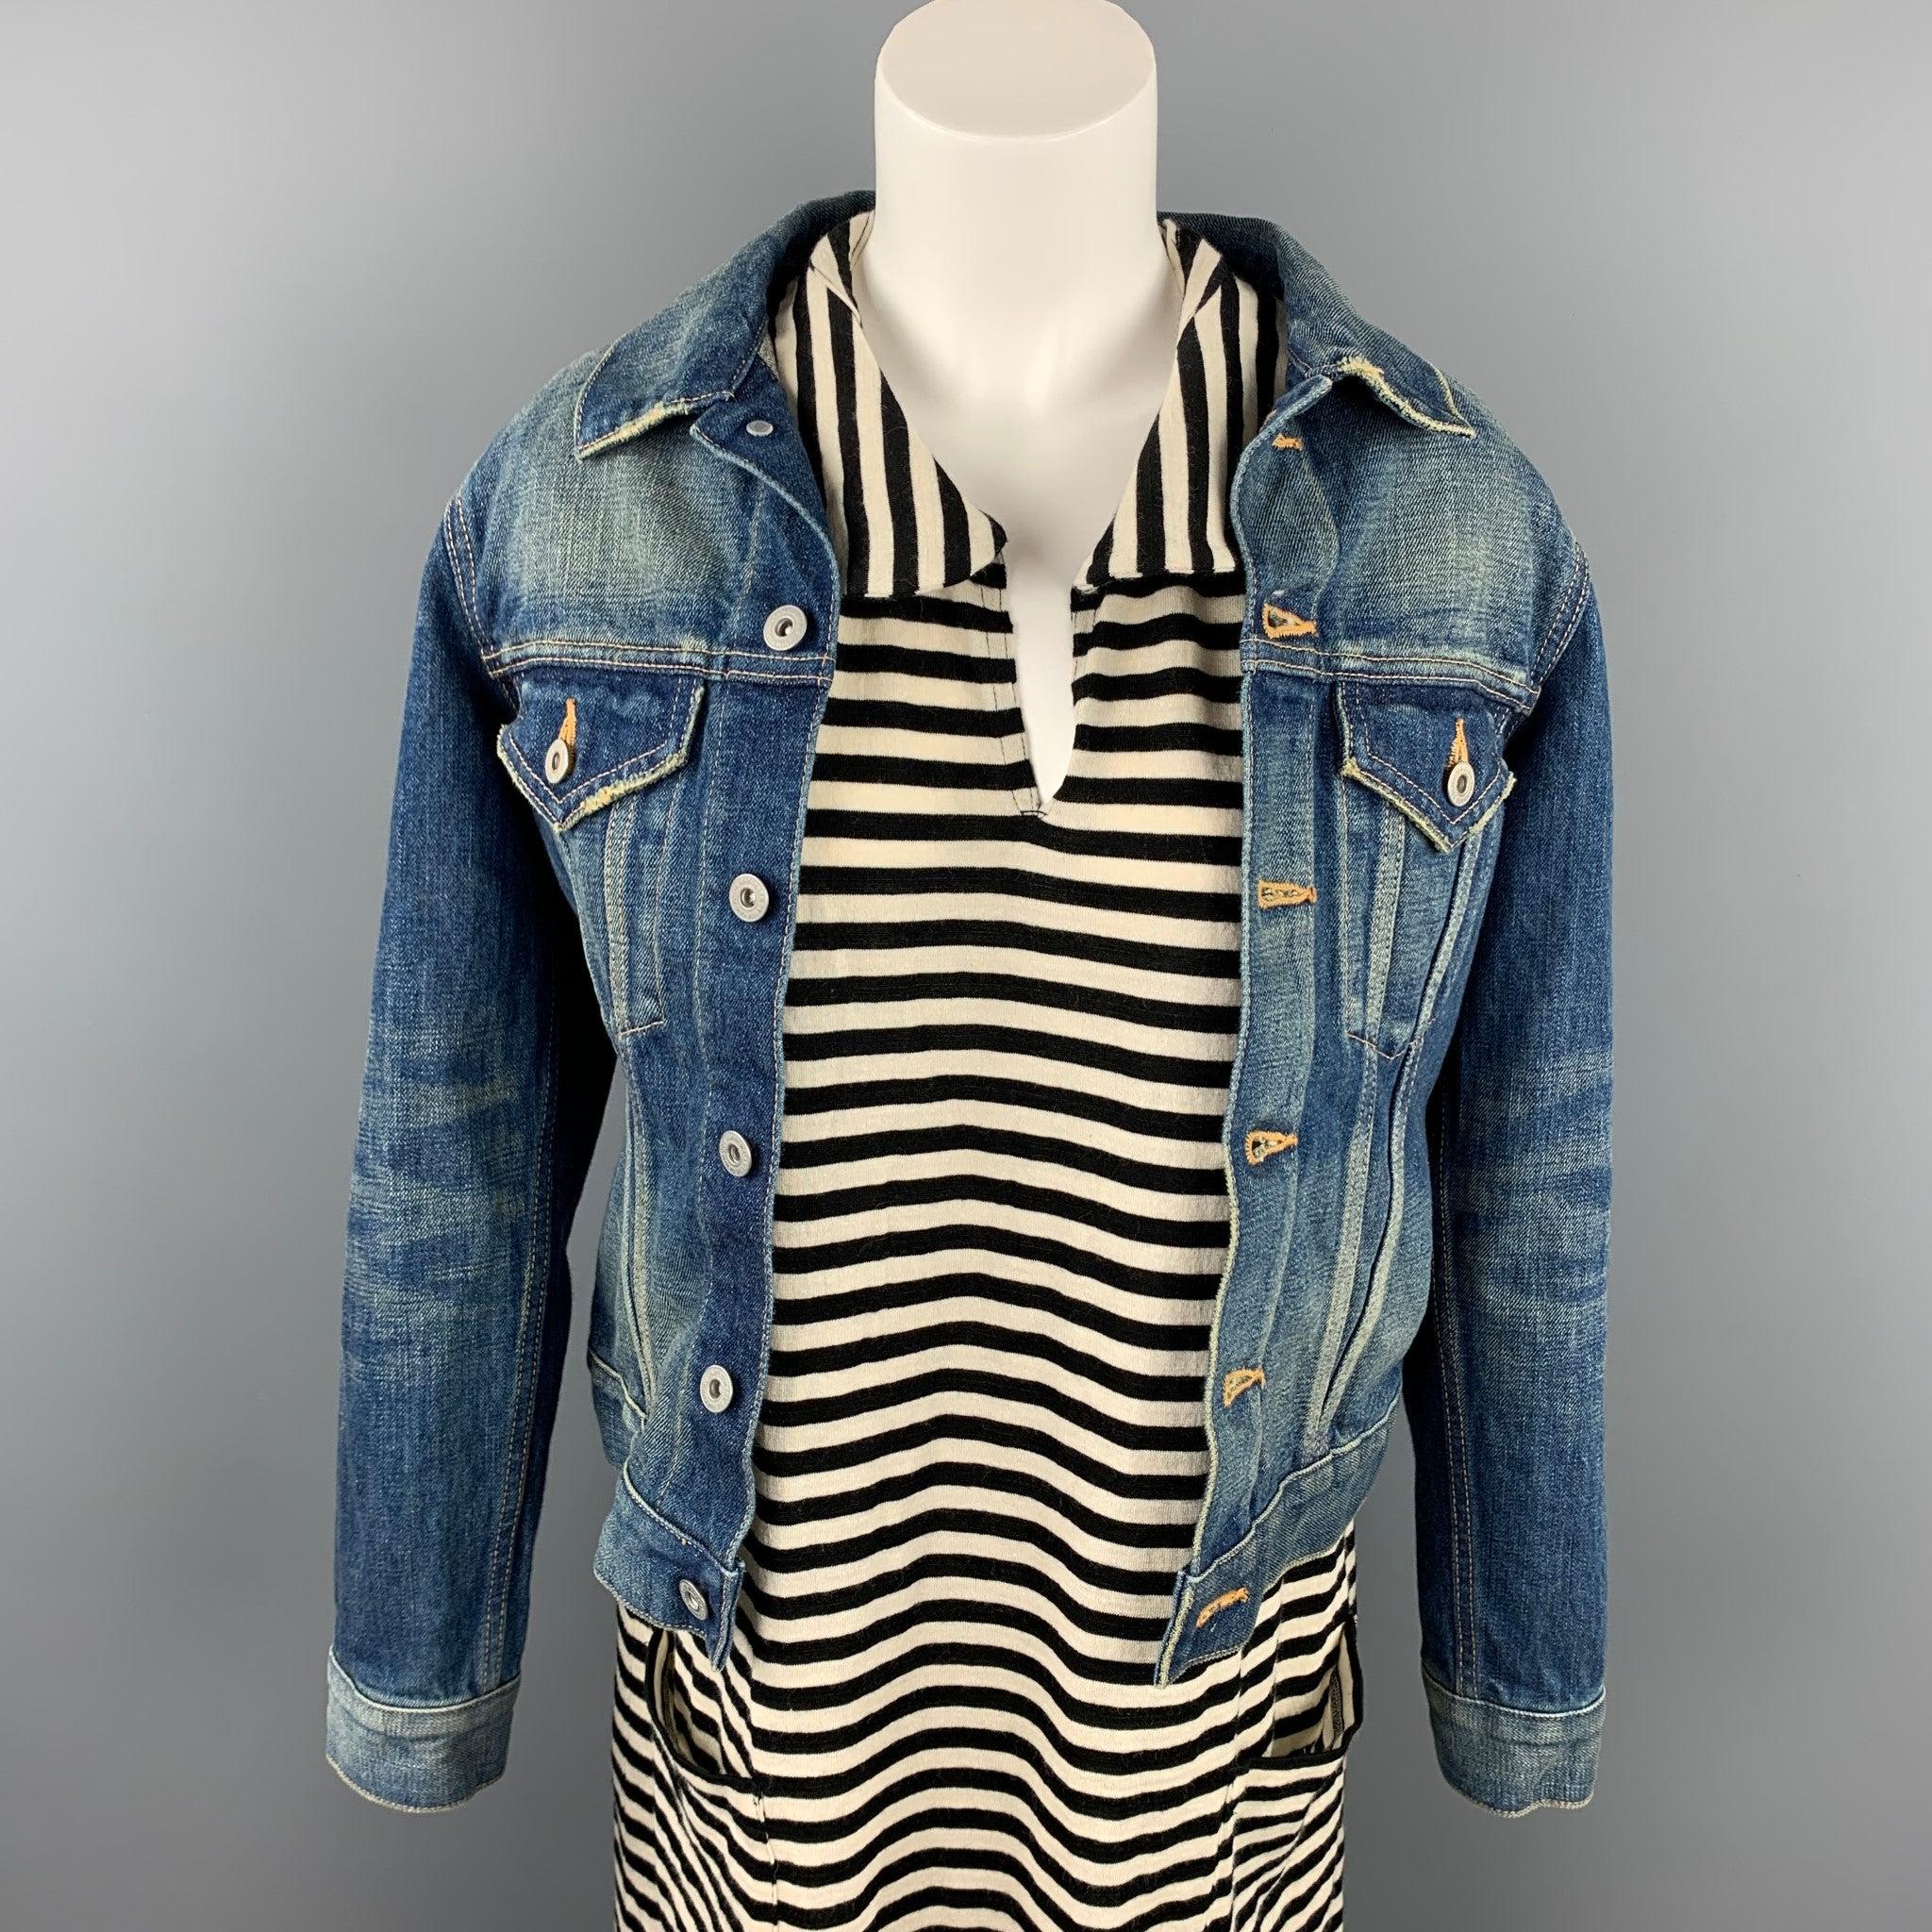 JUNYA WATANABE dress comes in w black & white stripe wool featuring a stitched layered denim jacket design, front pockets, and a spread collar. Made in Japan.Very Good
Pre-Owned Condition. 

Marked:   S / AD2015 

Measurements: 
 
Shoulder: 16